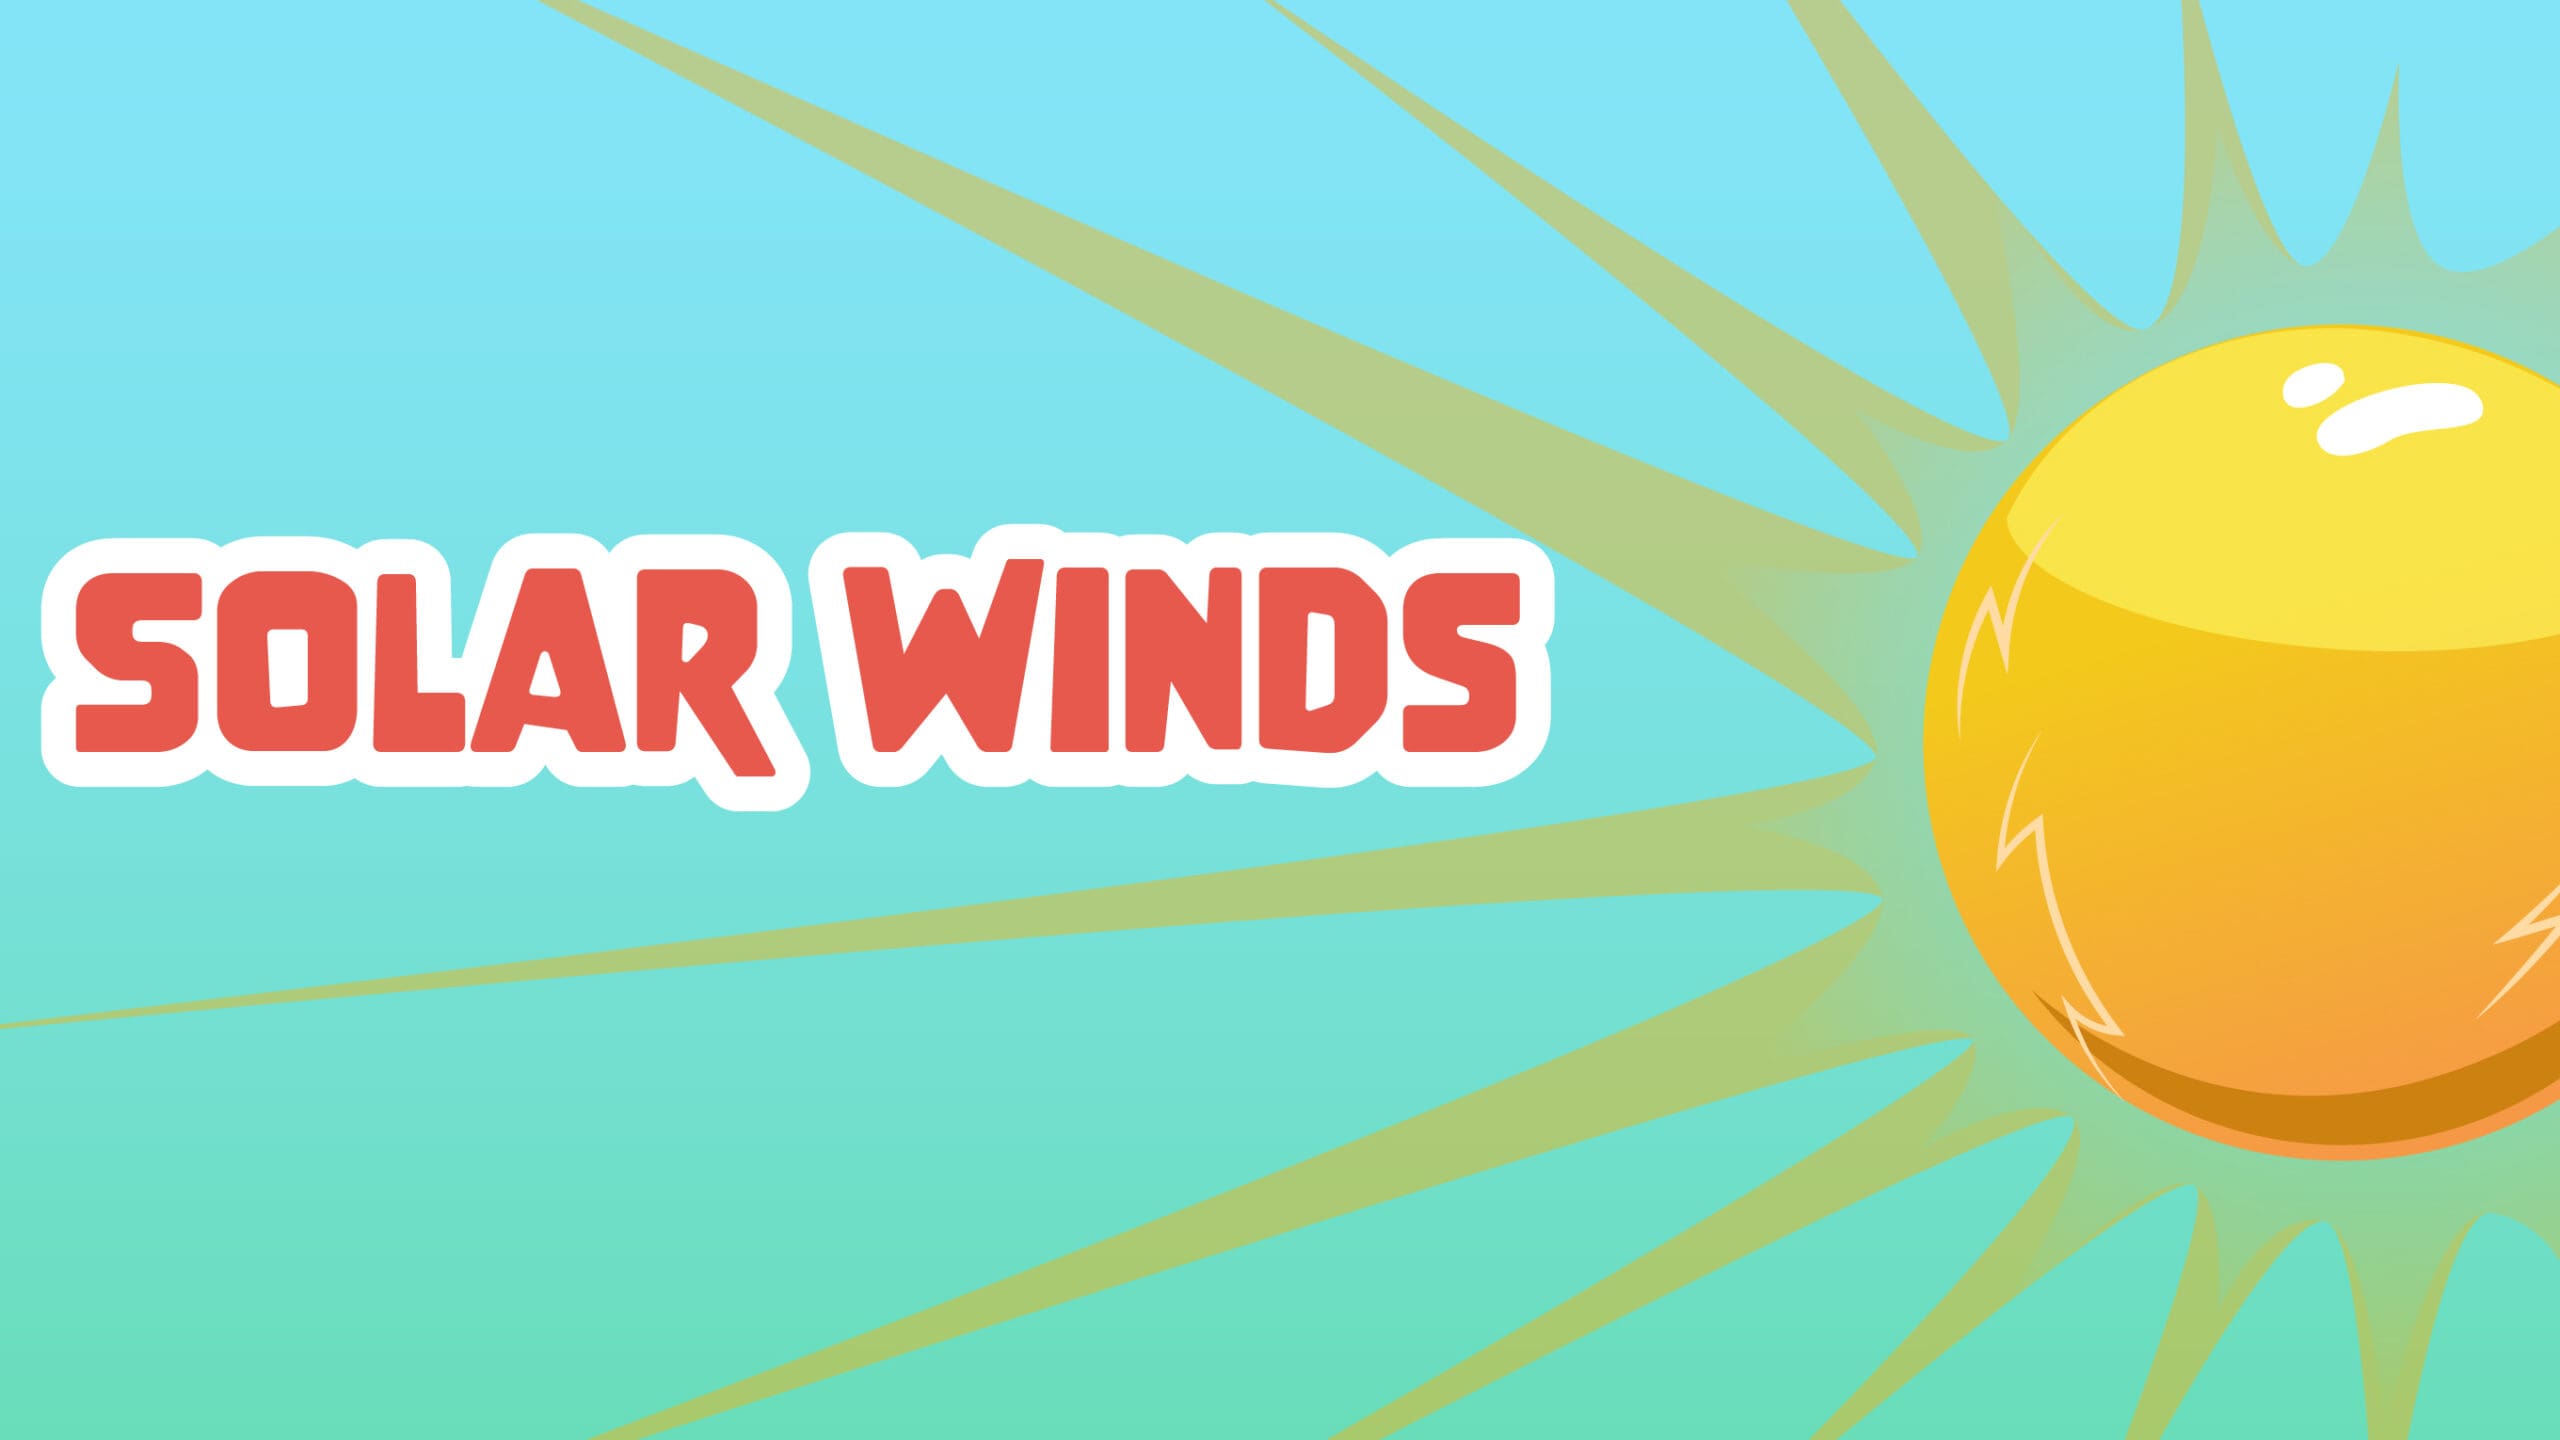 Solar Winds Facts for Kids – 5 Super Facts about Solar Winds